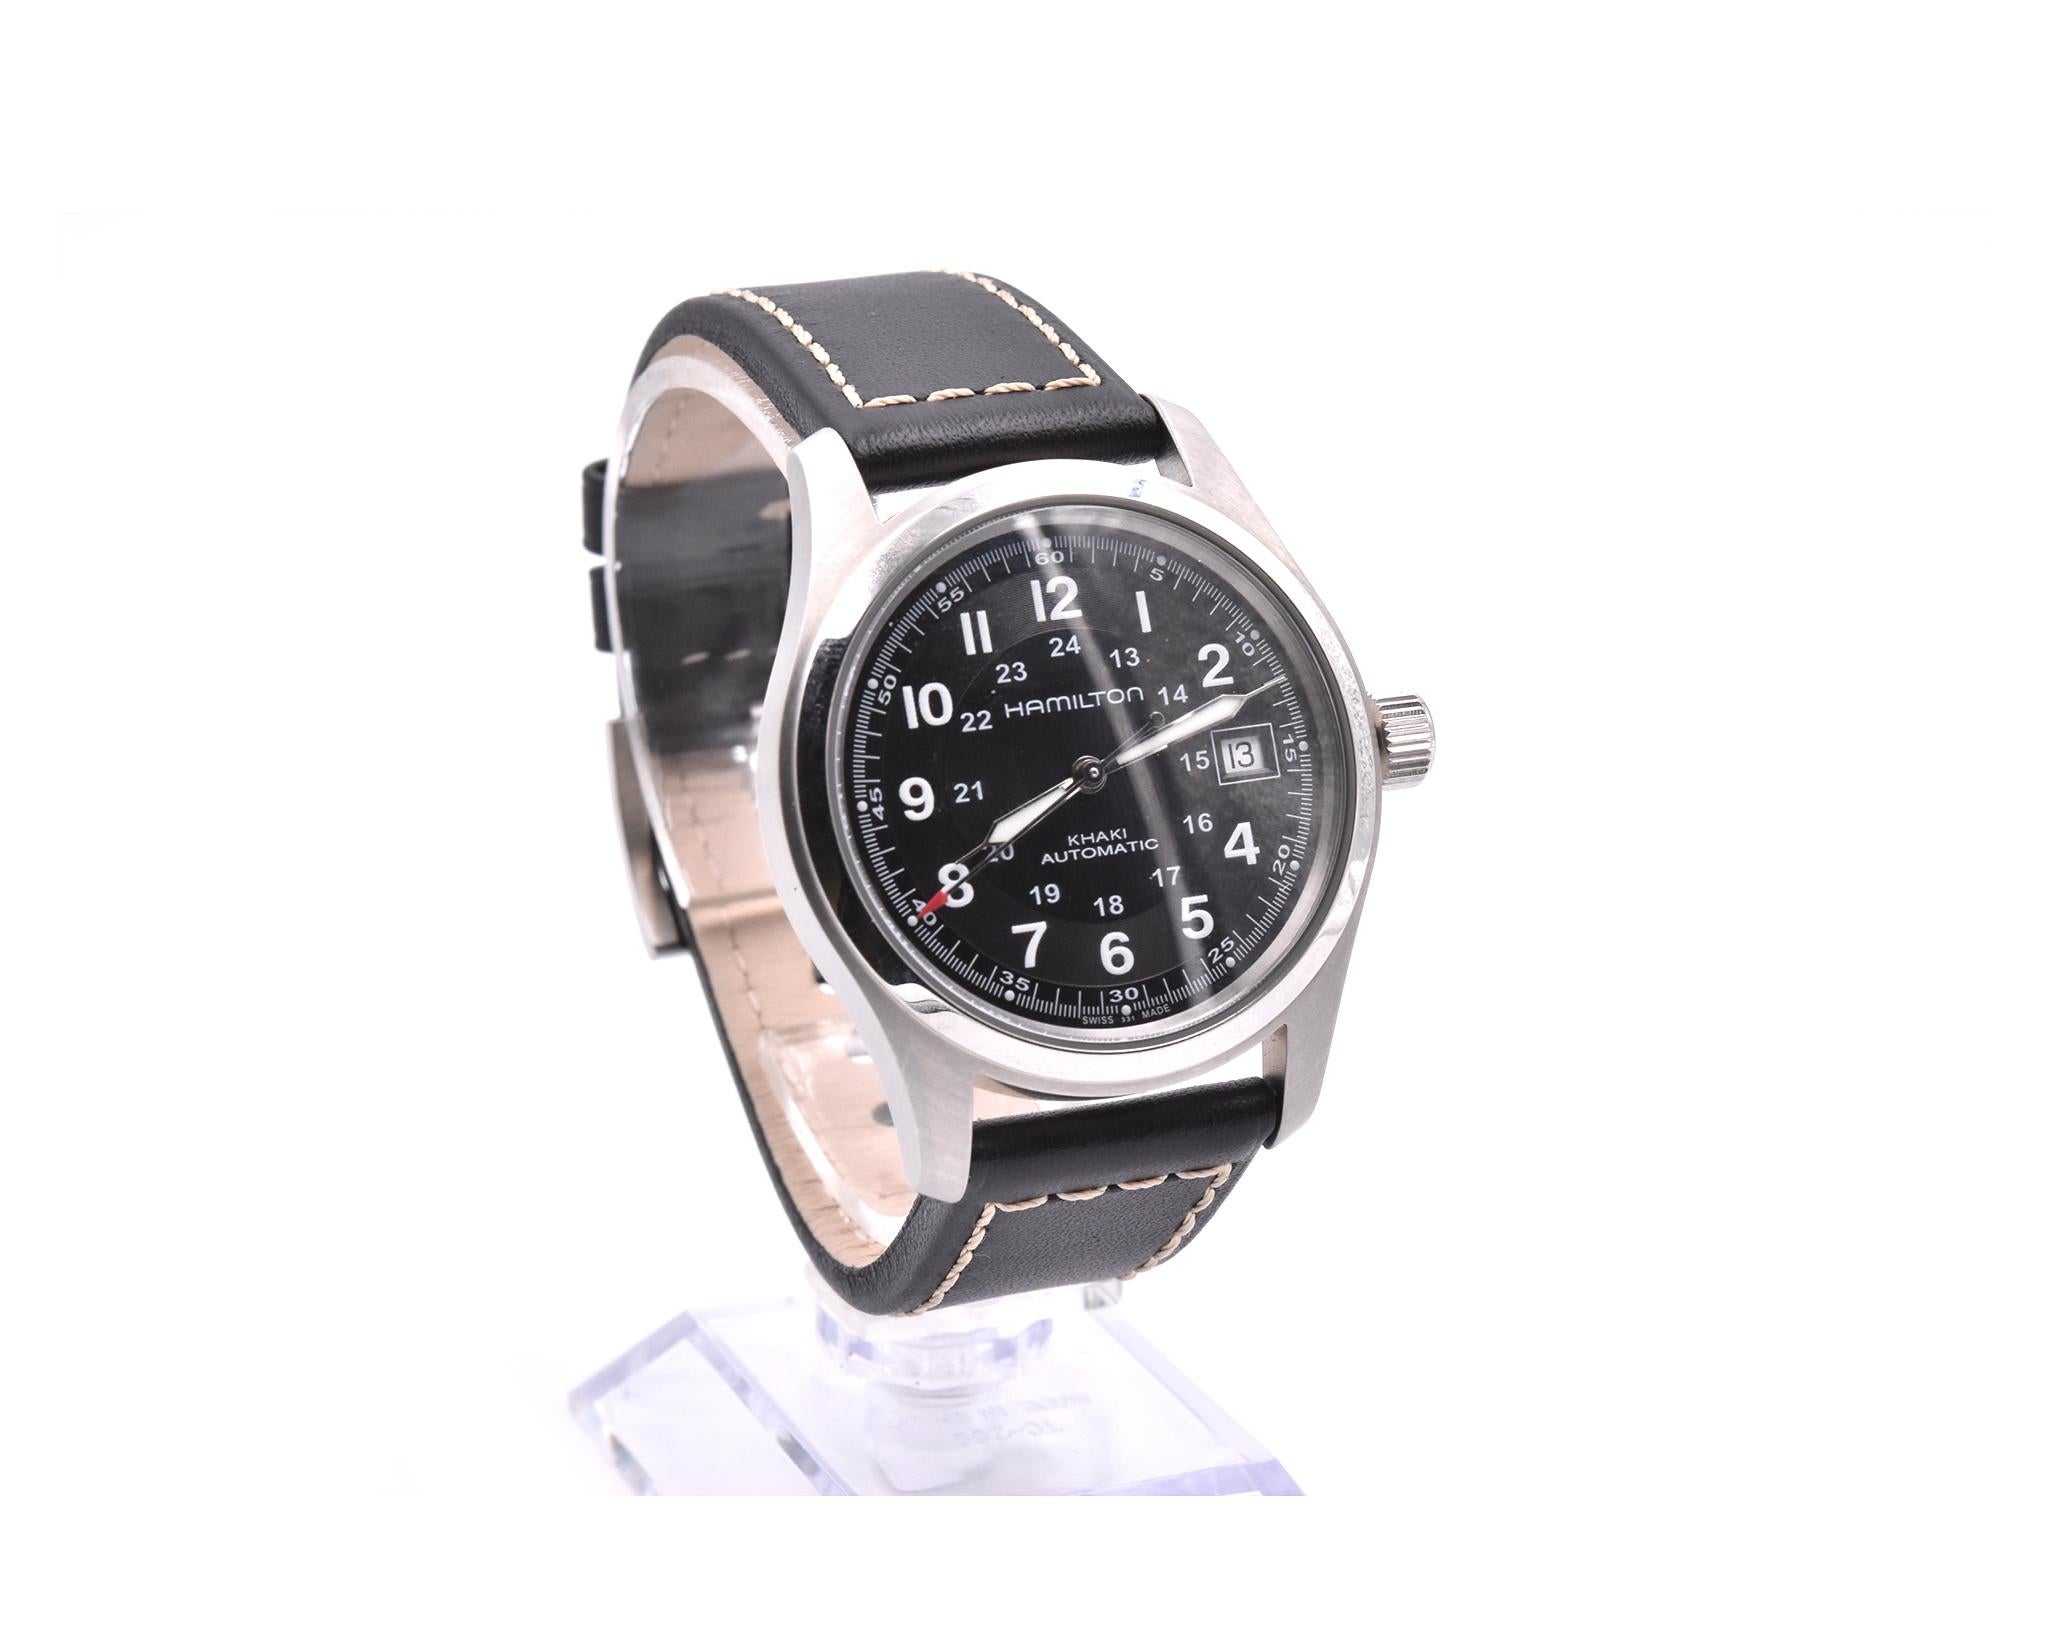 Movement: automatic
Function: hours, minutes, date
Case: 38mm stainless steel case, sapphire crystal, see-through case-back, pull/push crown
Dial: black dial with Arabic numbers, silver luminescent hands, date at 3 o’clock
Bracelet: black leather